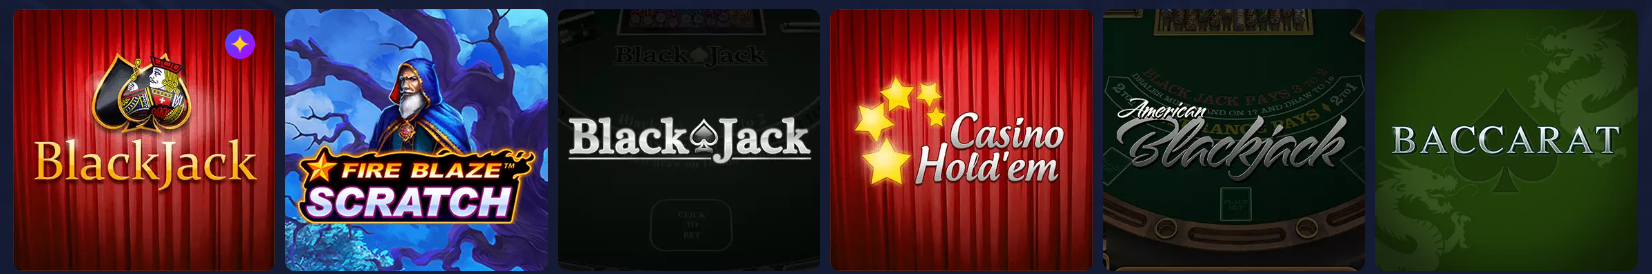 Joo Casino Table games and Poker